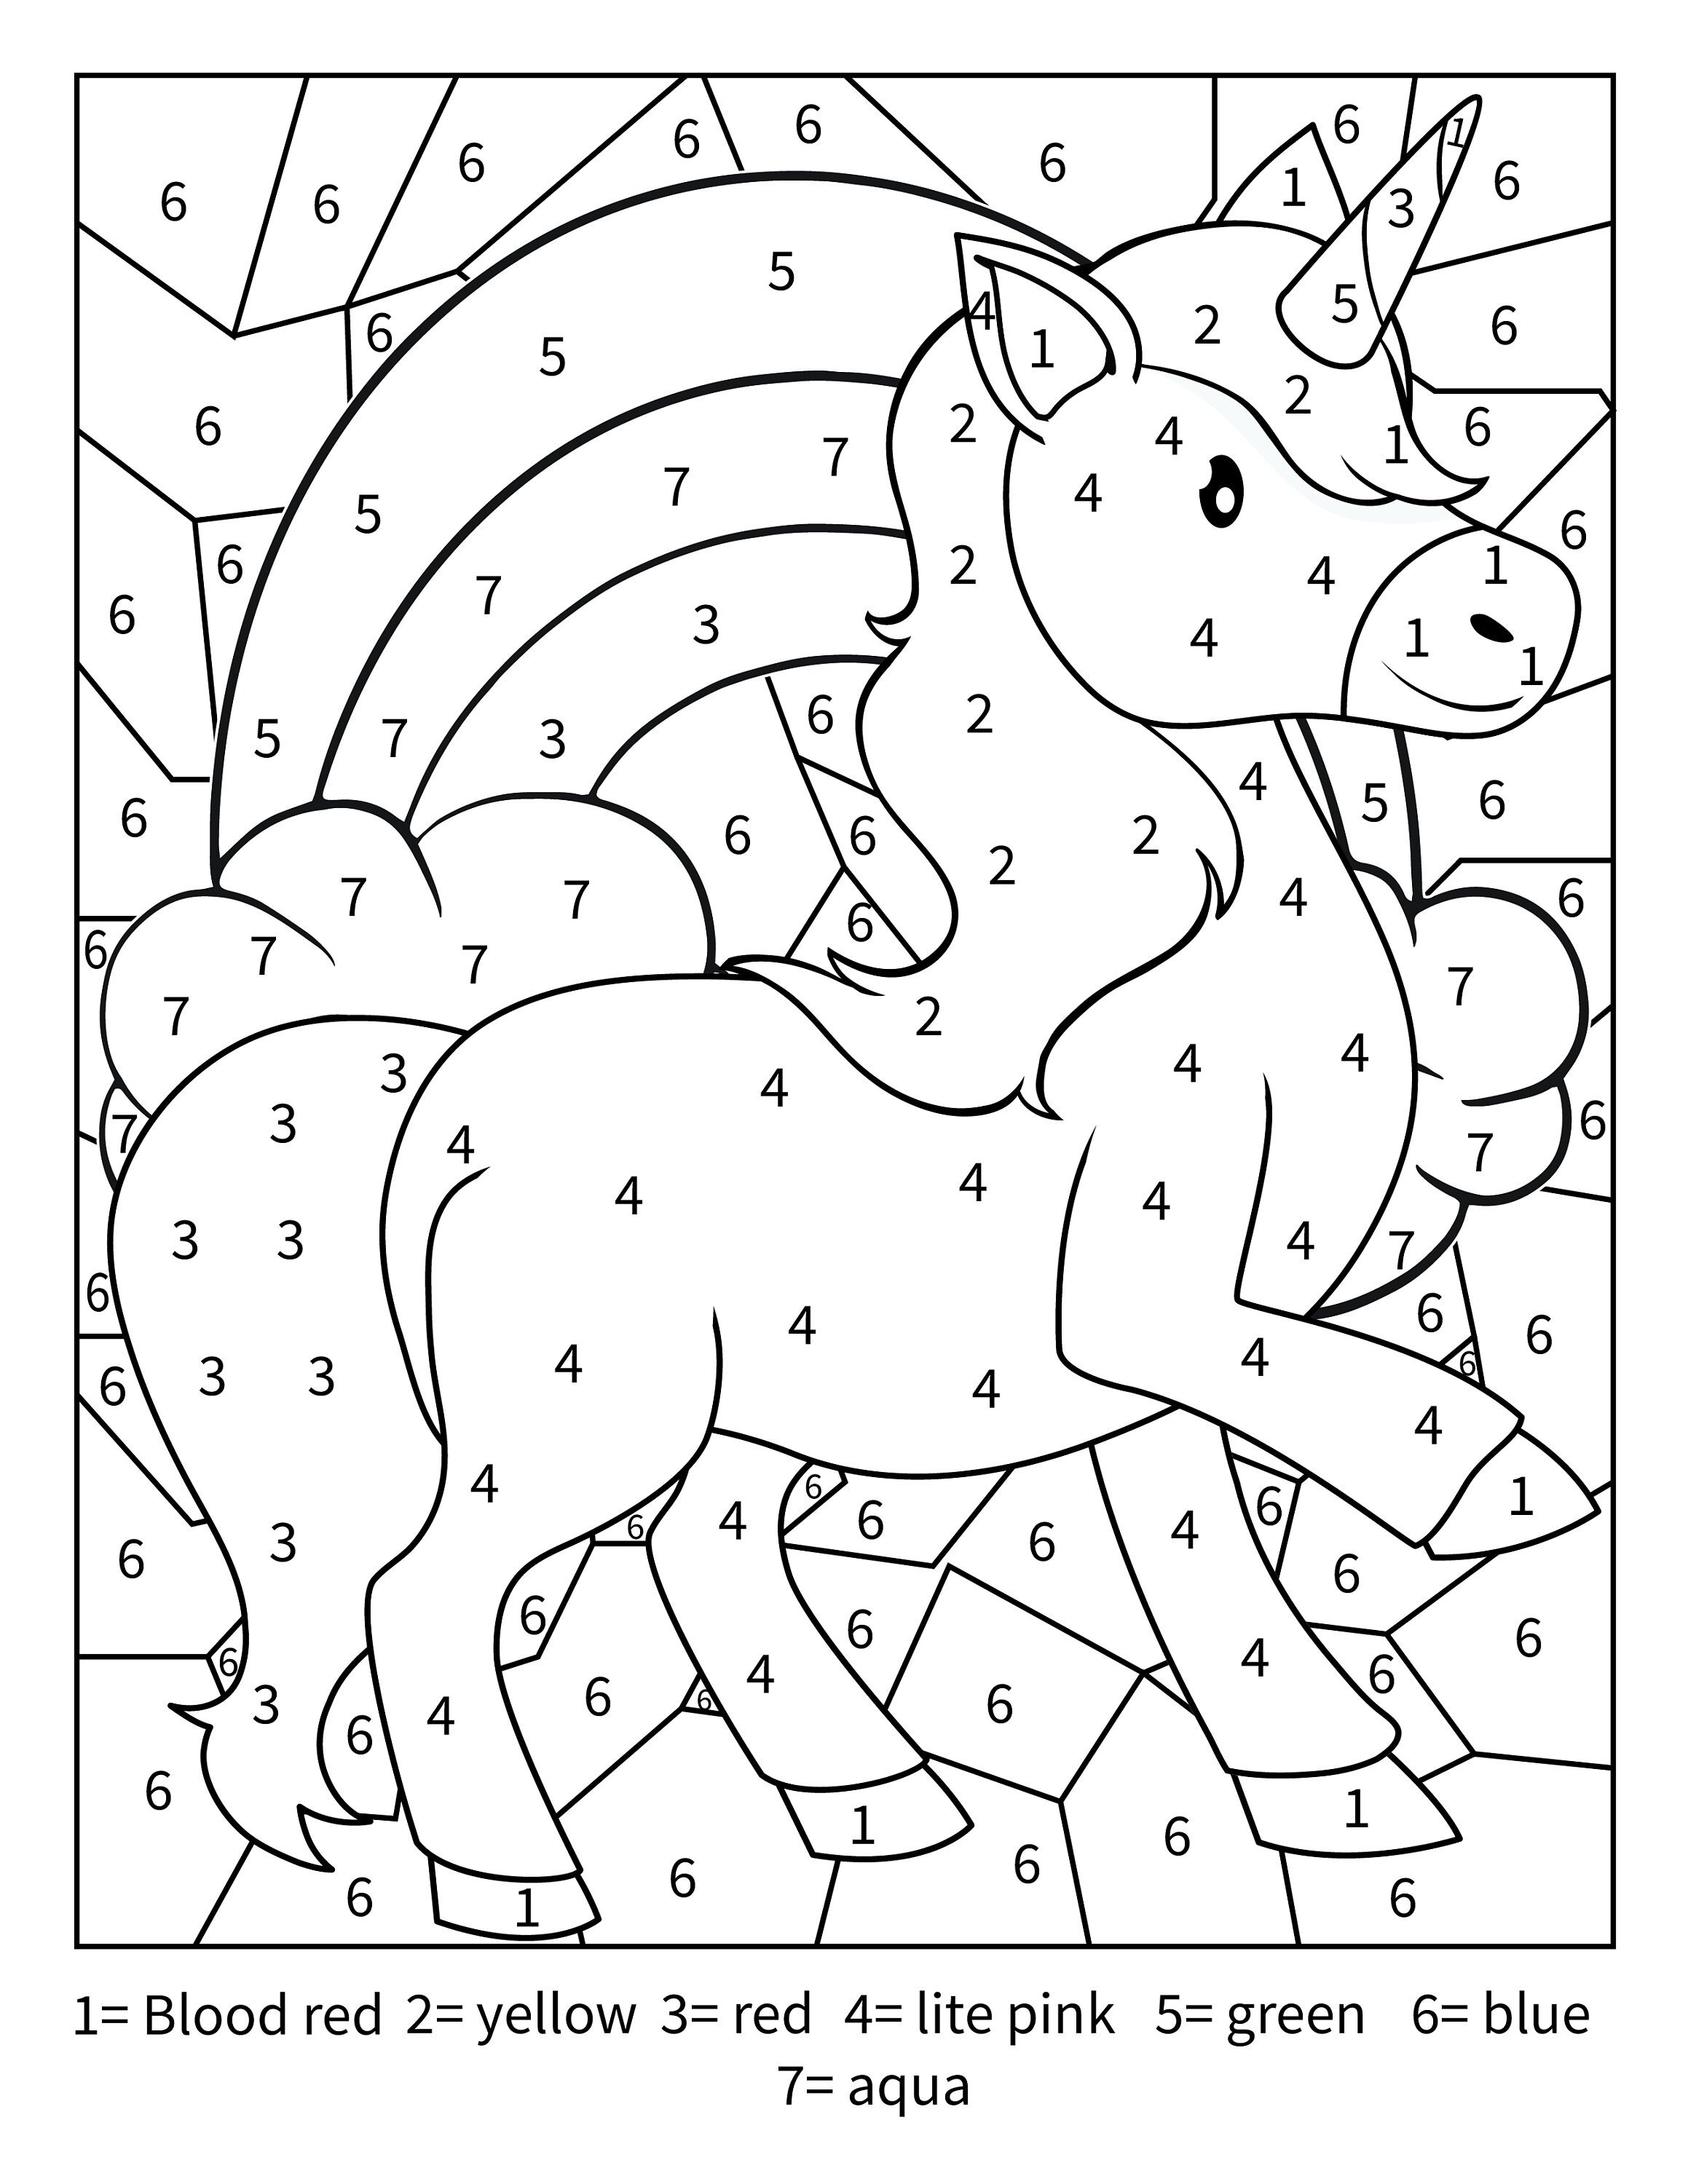 Printable unicorn color by number activity page for toddlers kids and adults download now